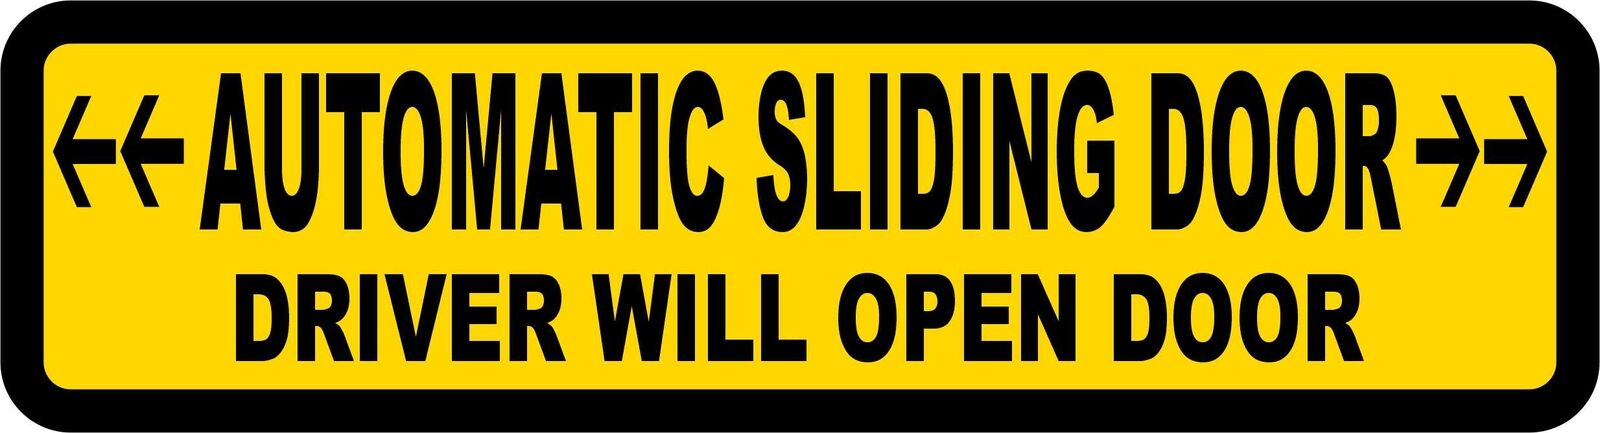 8in x 2in Automatic Sliding Door Driver Will Open Vinyl Sticker Car Sign Decal